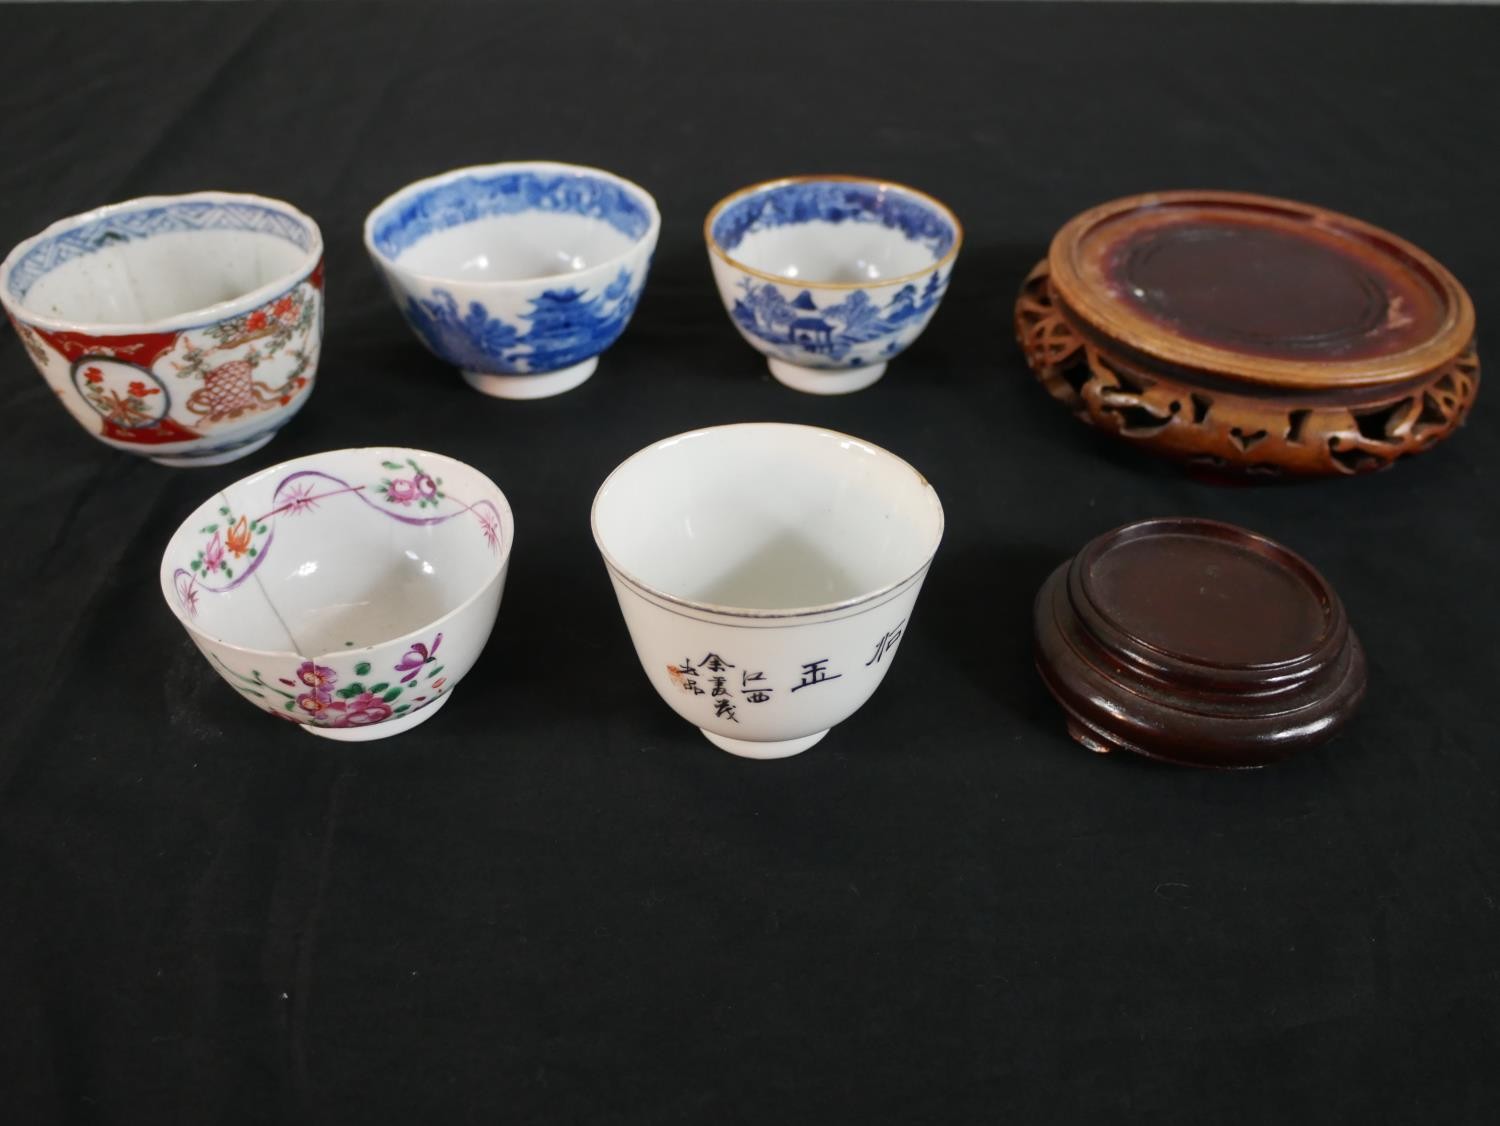 A collection of five 19th century Chinese tea bowls along with two carved and pierced hardwood